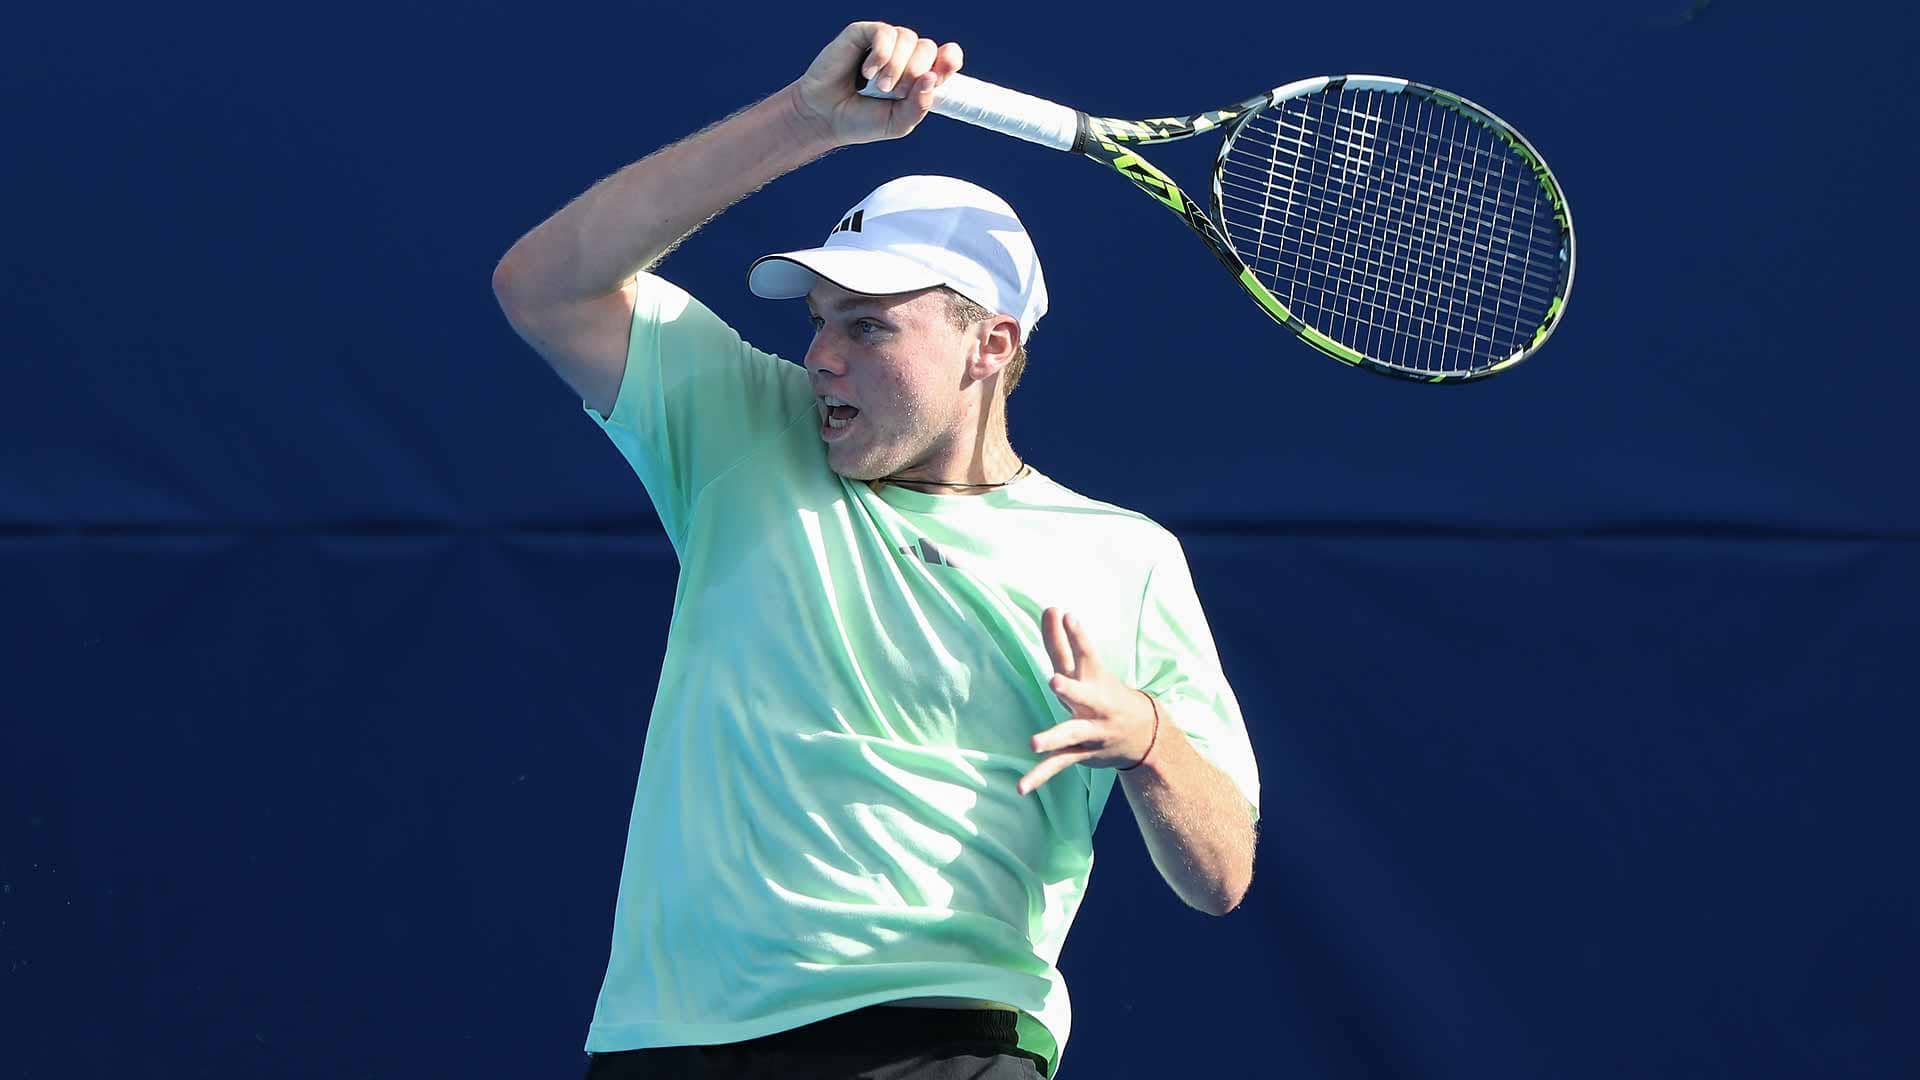 Alex Michelsen is competing in Delray Beach as a professional for the first time.